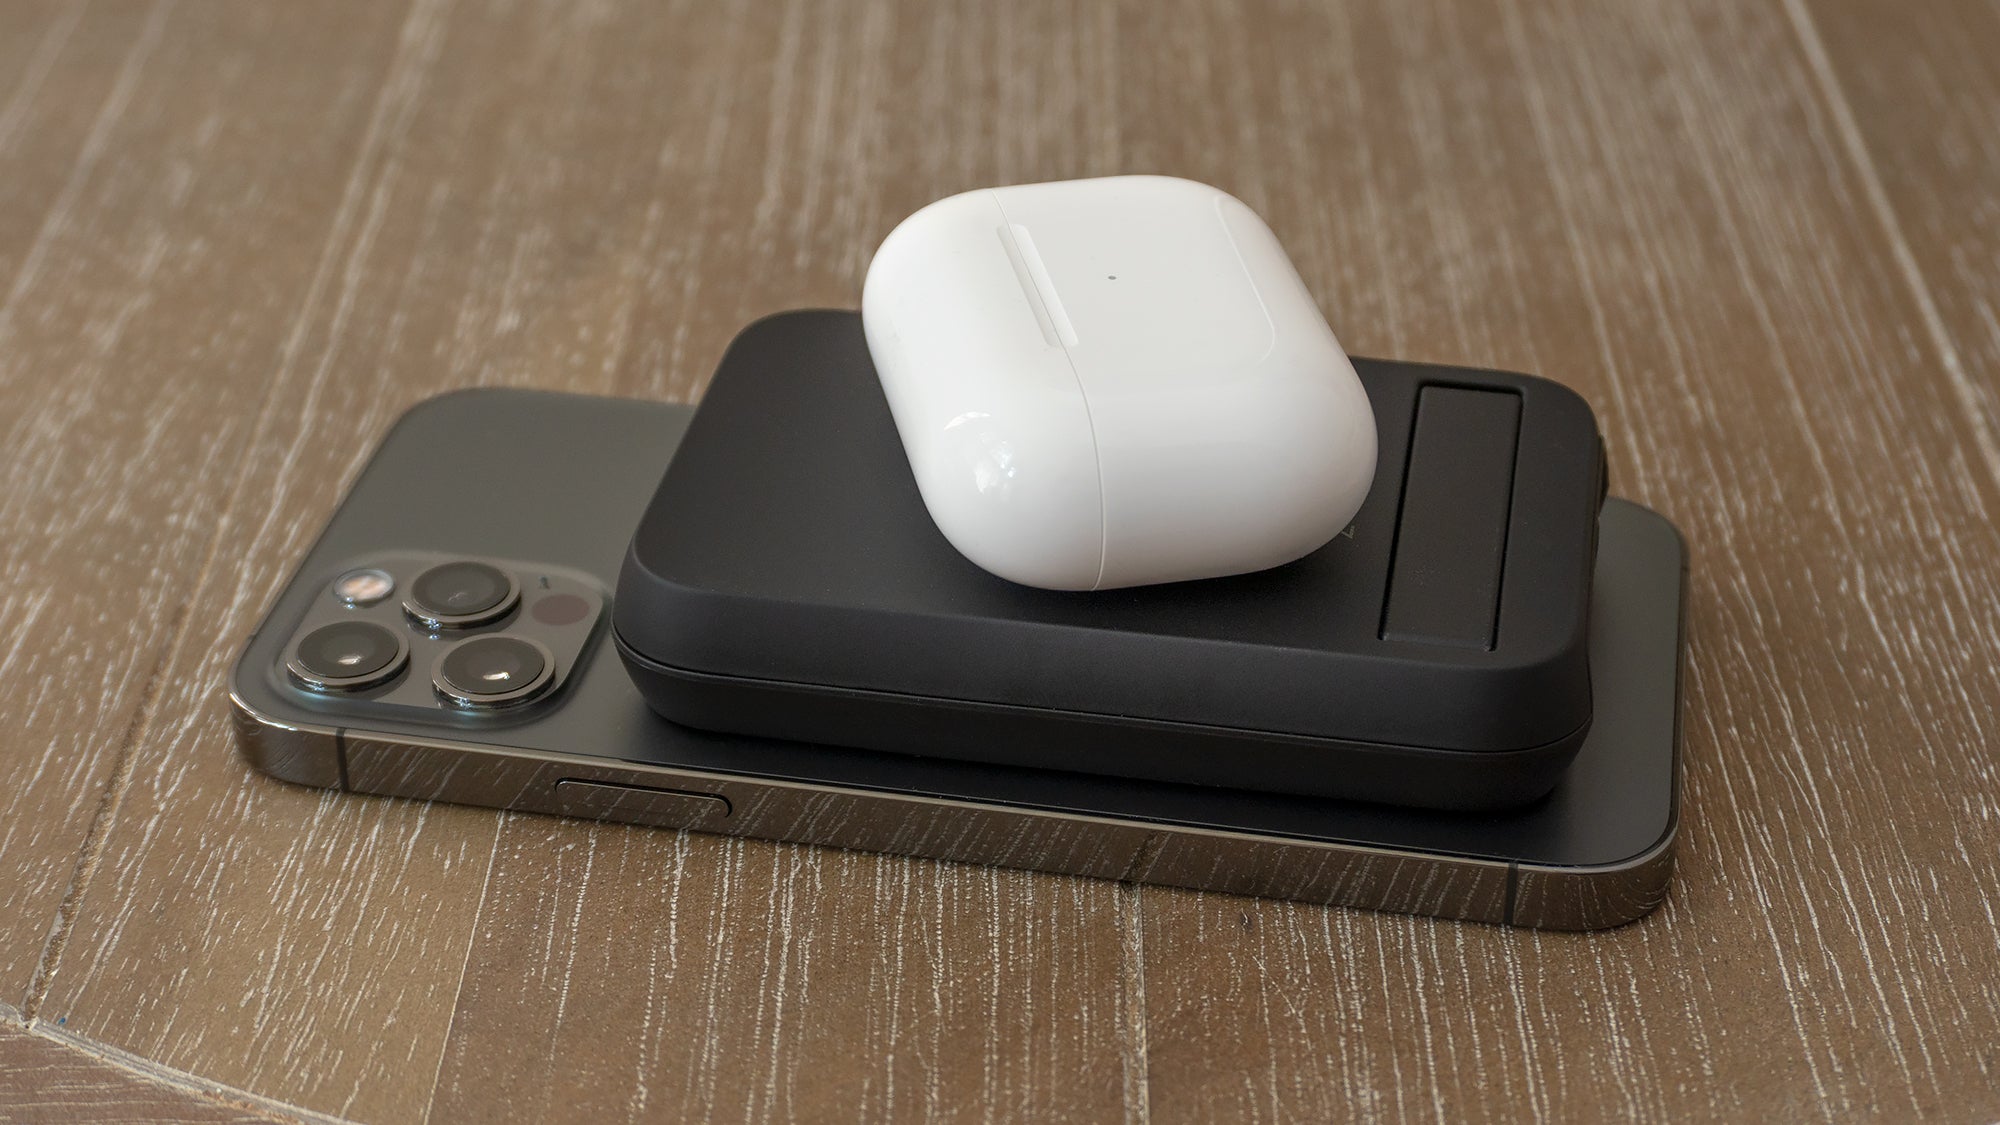 The Zens Magnetic Dual Powerbank with stand actually offers wireless charging on both sides (only one side is MagSafe-compatible) so you can wirelessly charge your phone and a second device at the same time. (Photo: Andrew Liszewski - Gizmodo)